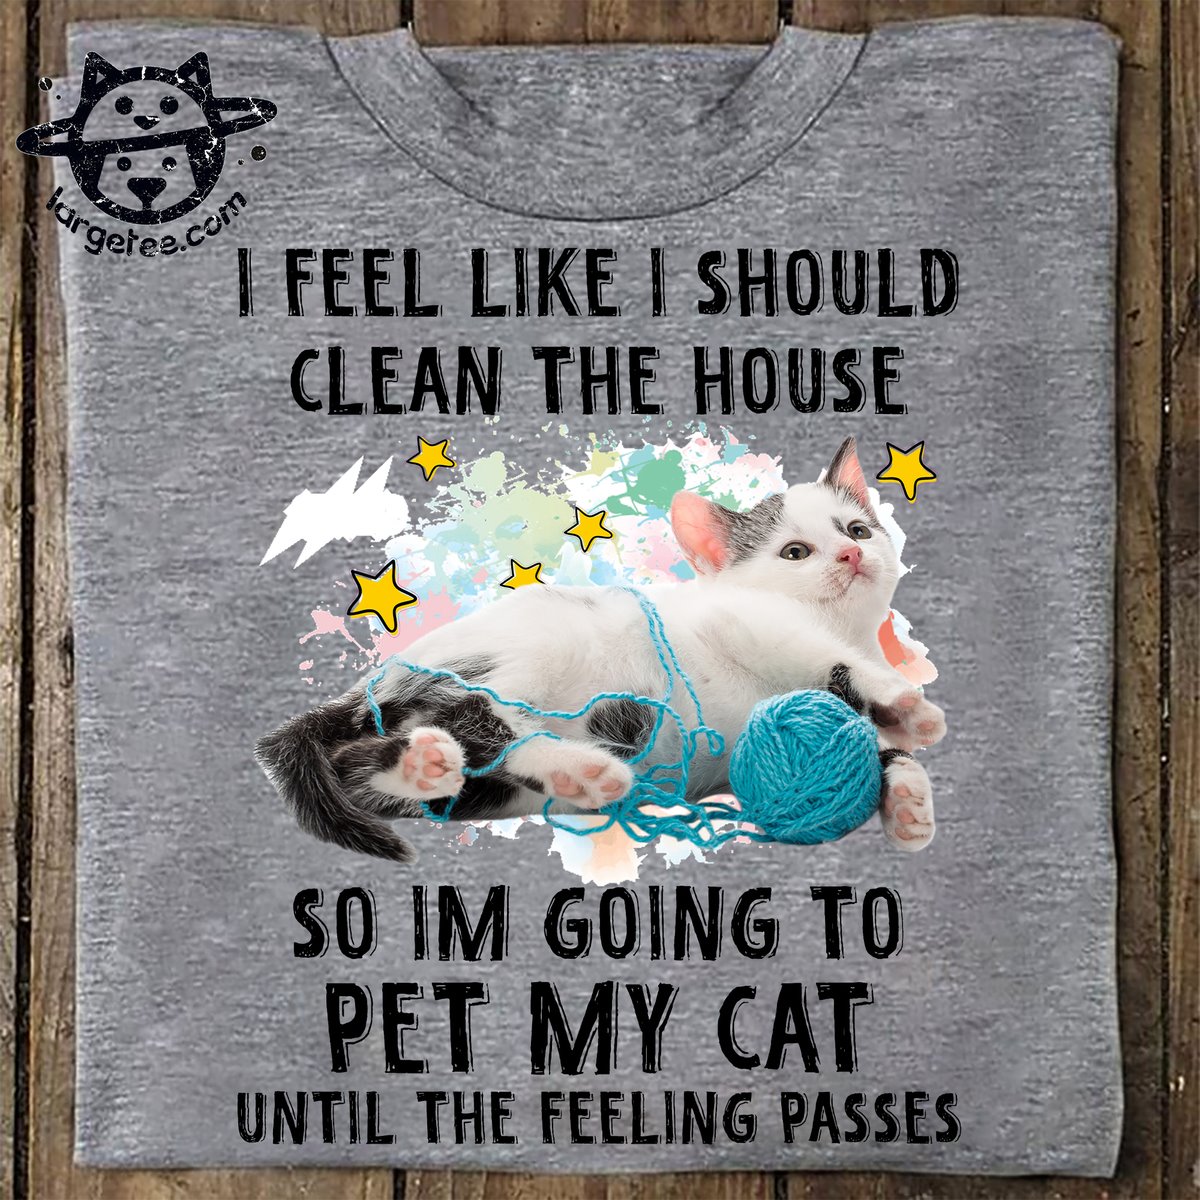 I feel like I should clean the house so I'm going to pet my cat until the feeling passes - Cat lover